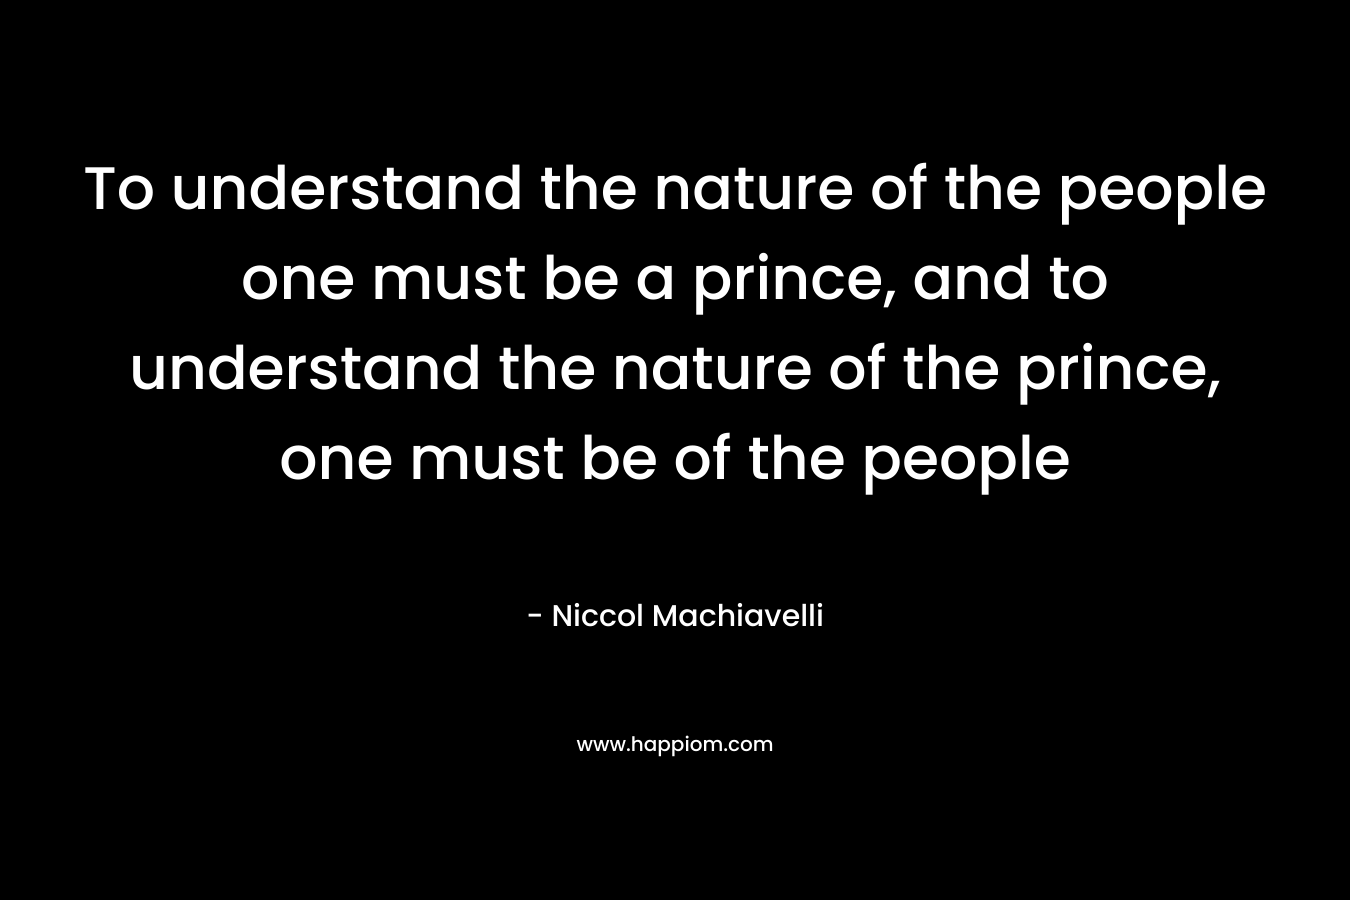 To understand the nature of the people one must be a prince, and to understand the nature of the prince, one must be of the people